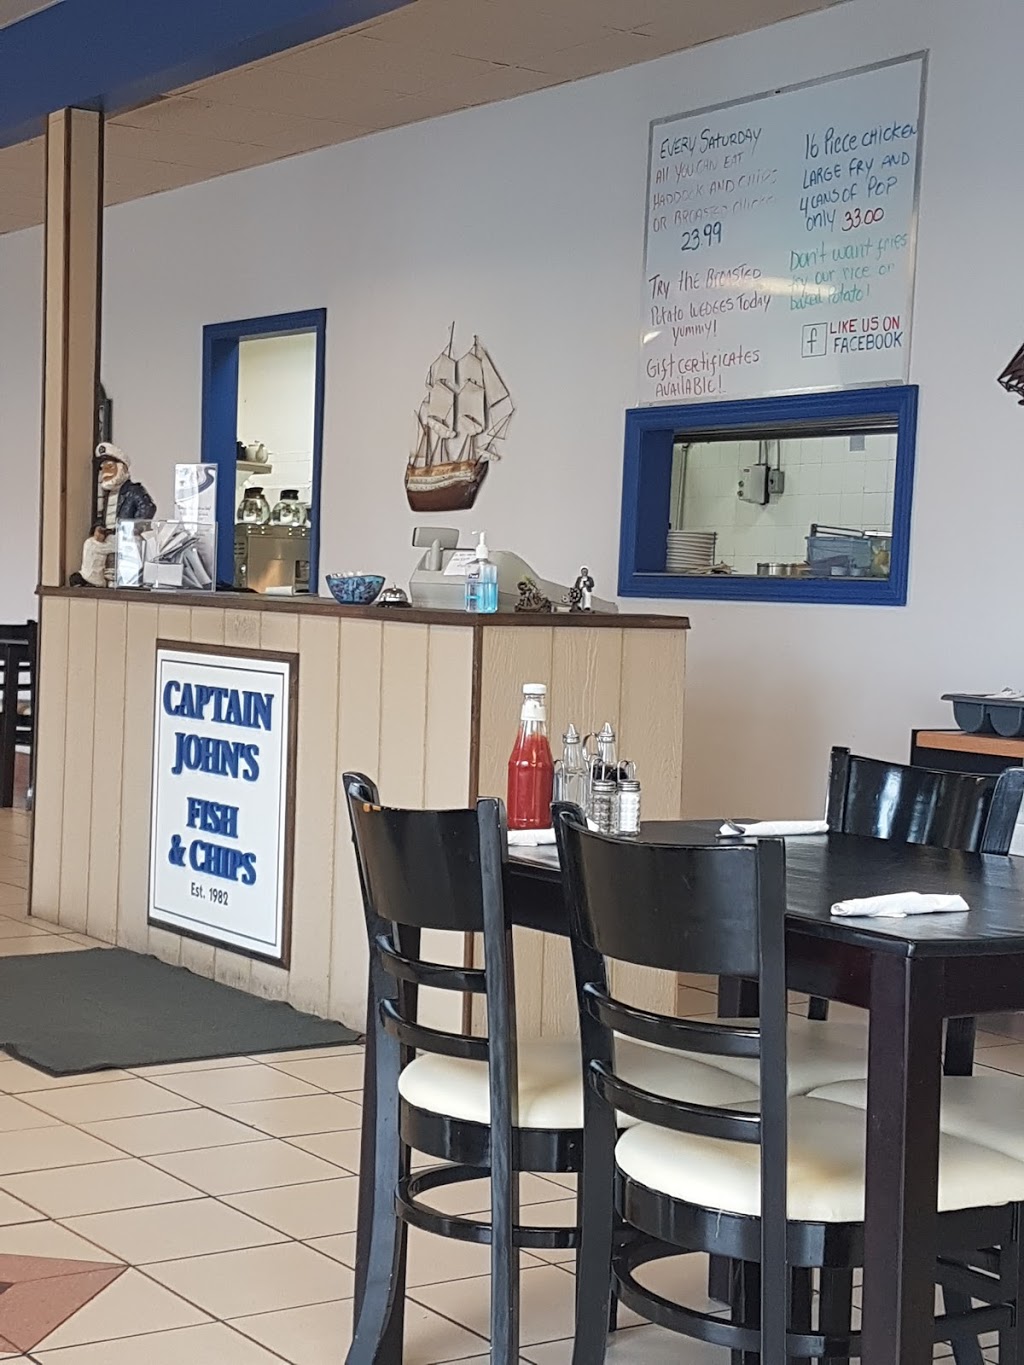 The Original Captain Johns Fish & Chips | restaurant | 125 Mitton St S, Sarnia, ON N7T 5W3, Canada | 5193442525 OR +1 519-344-2525